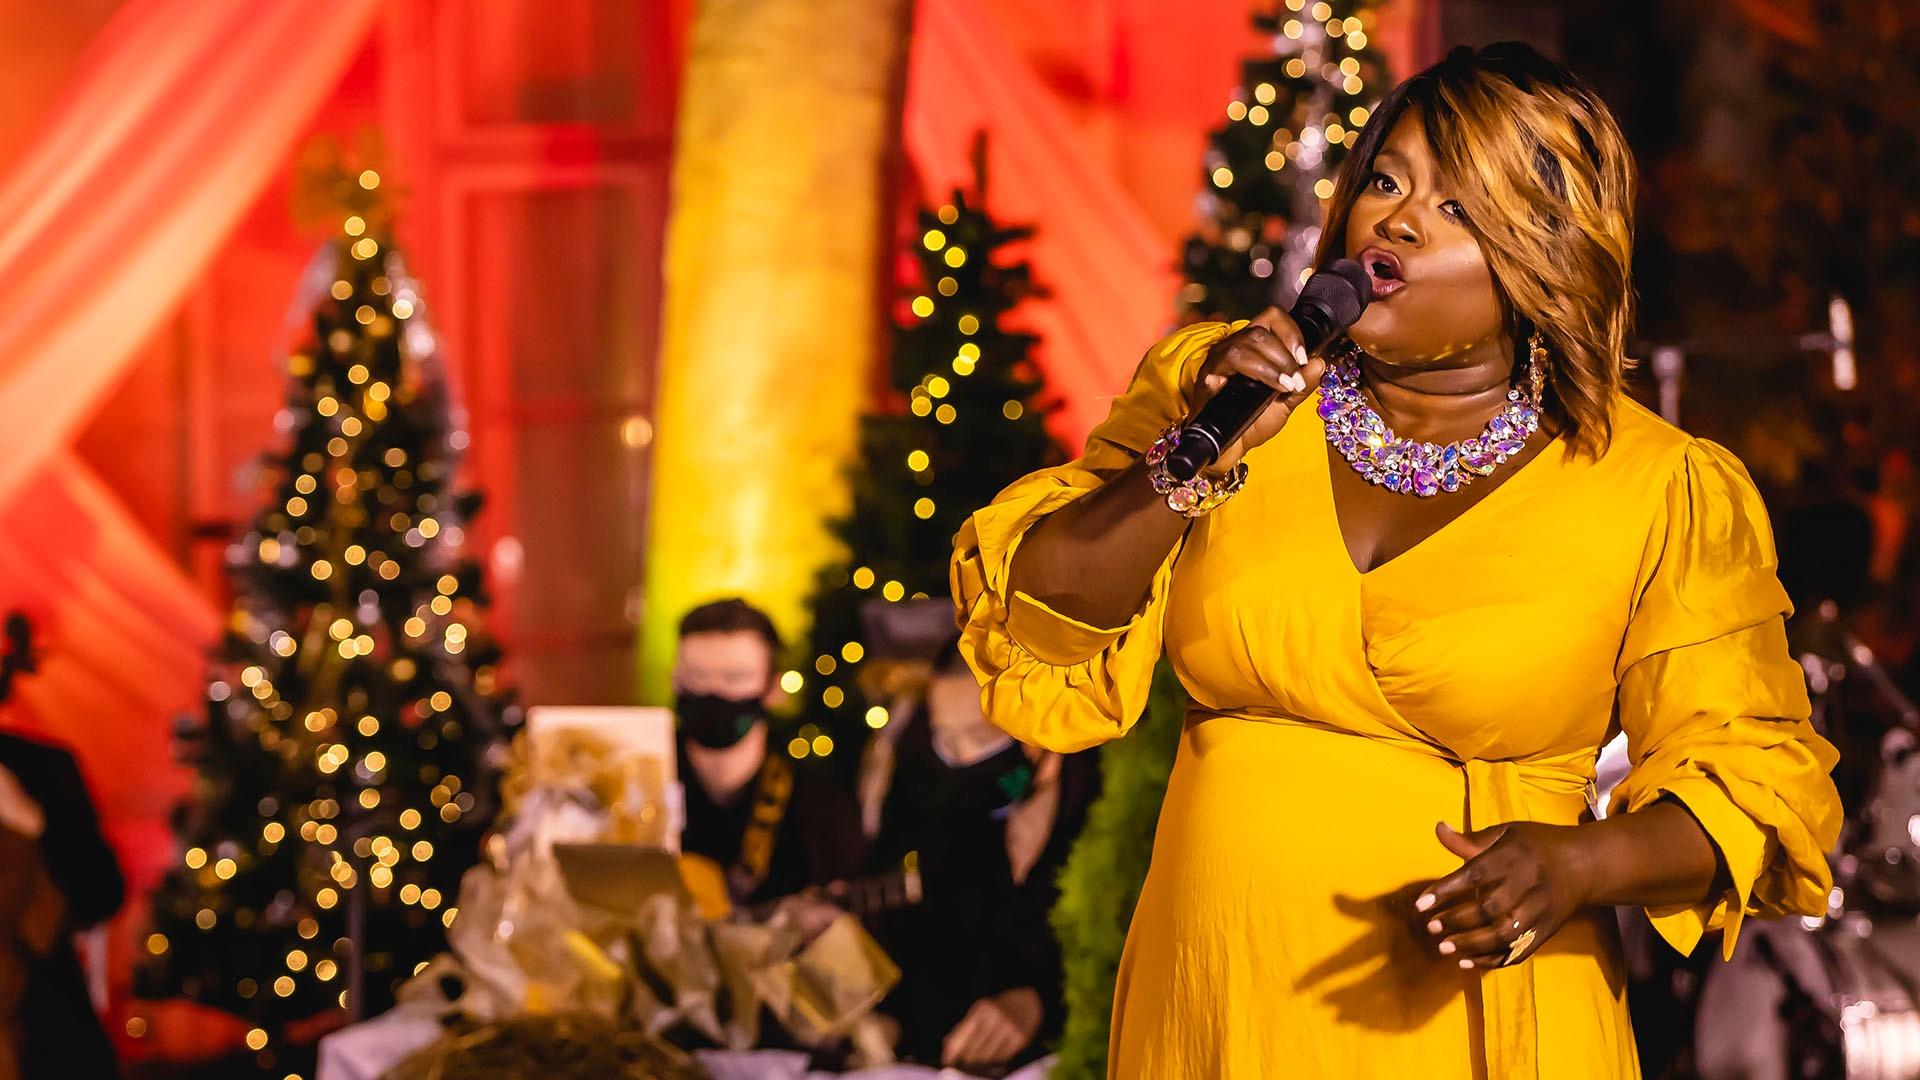 Image of Nova Y. Payton performing "Rudolph the Red-Nosed Reindeer."